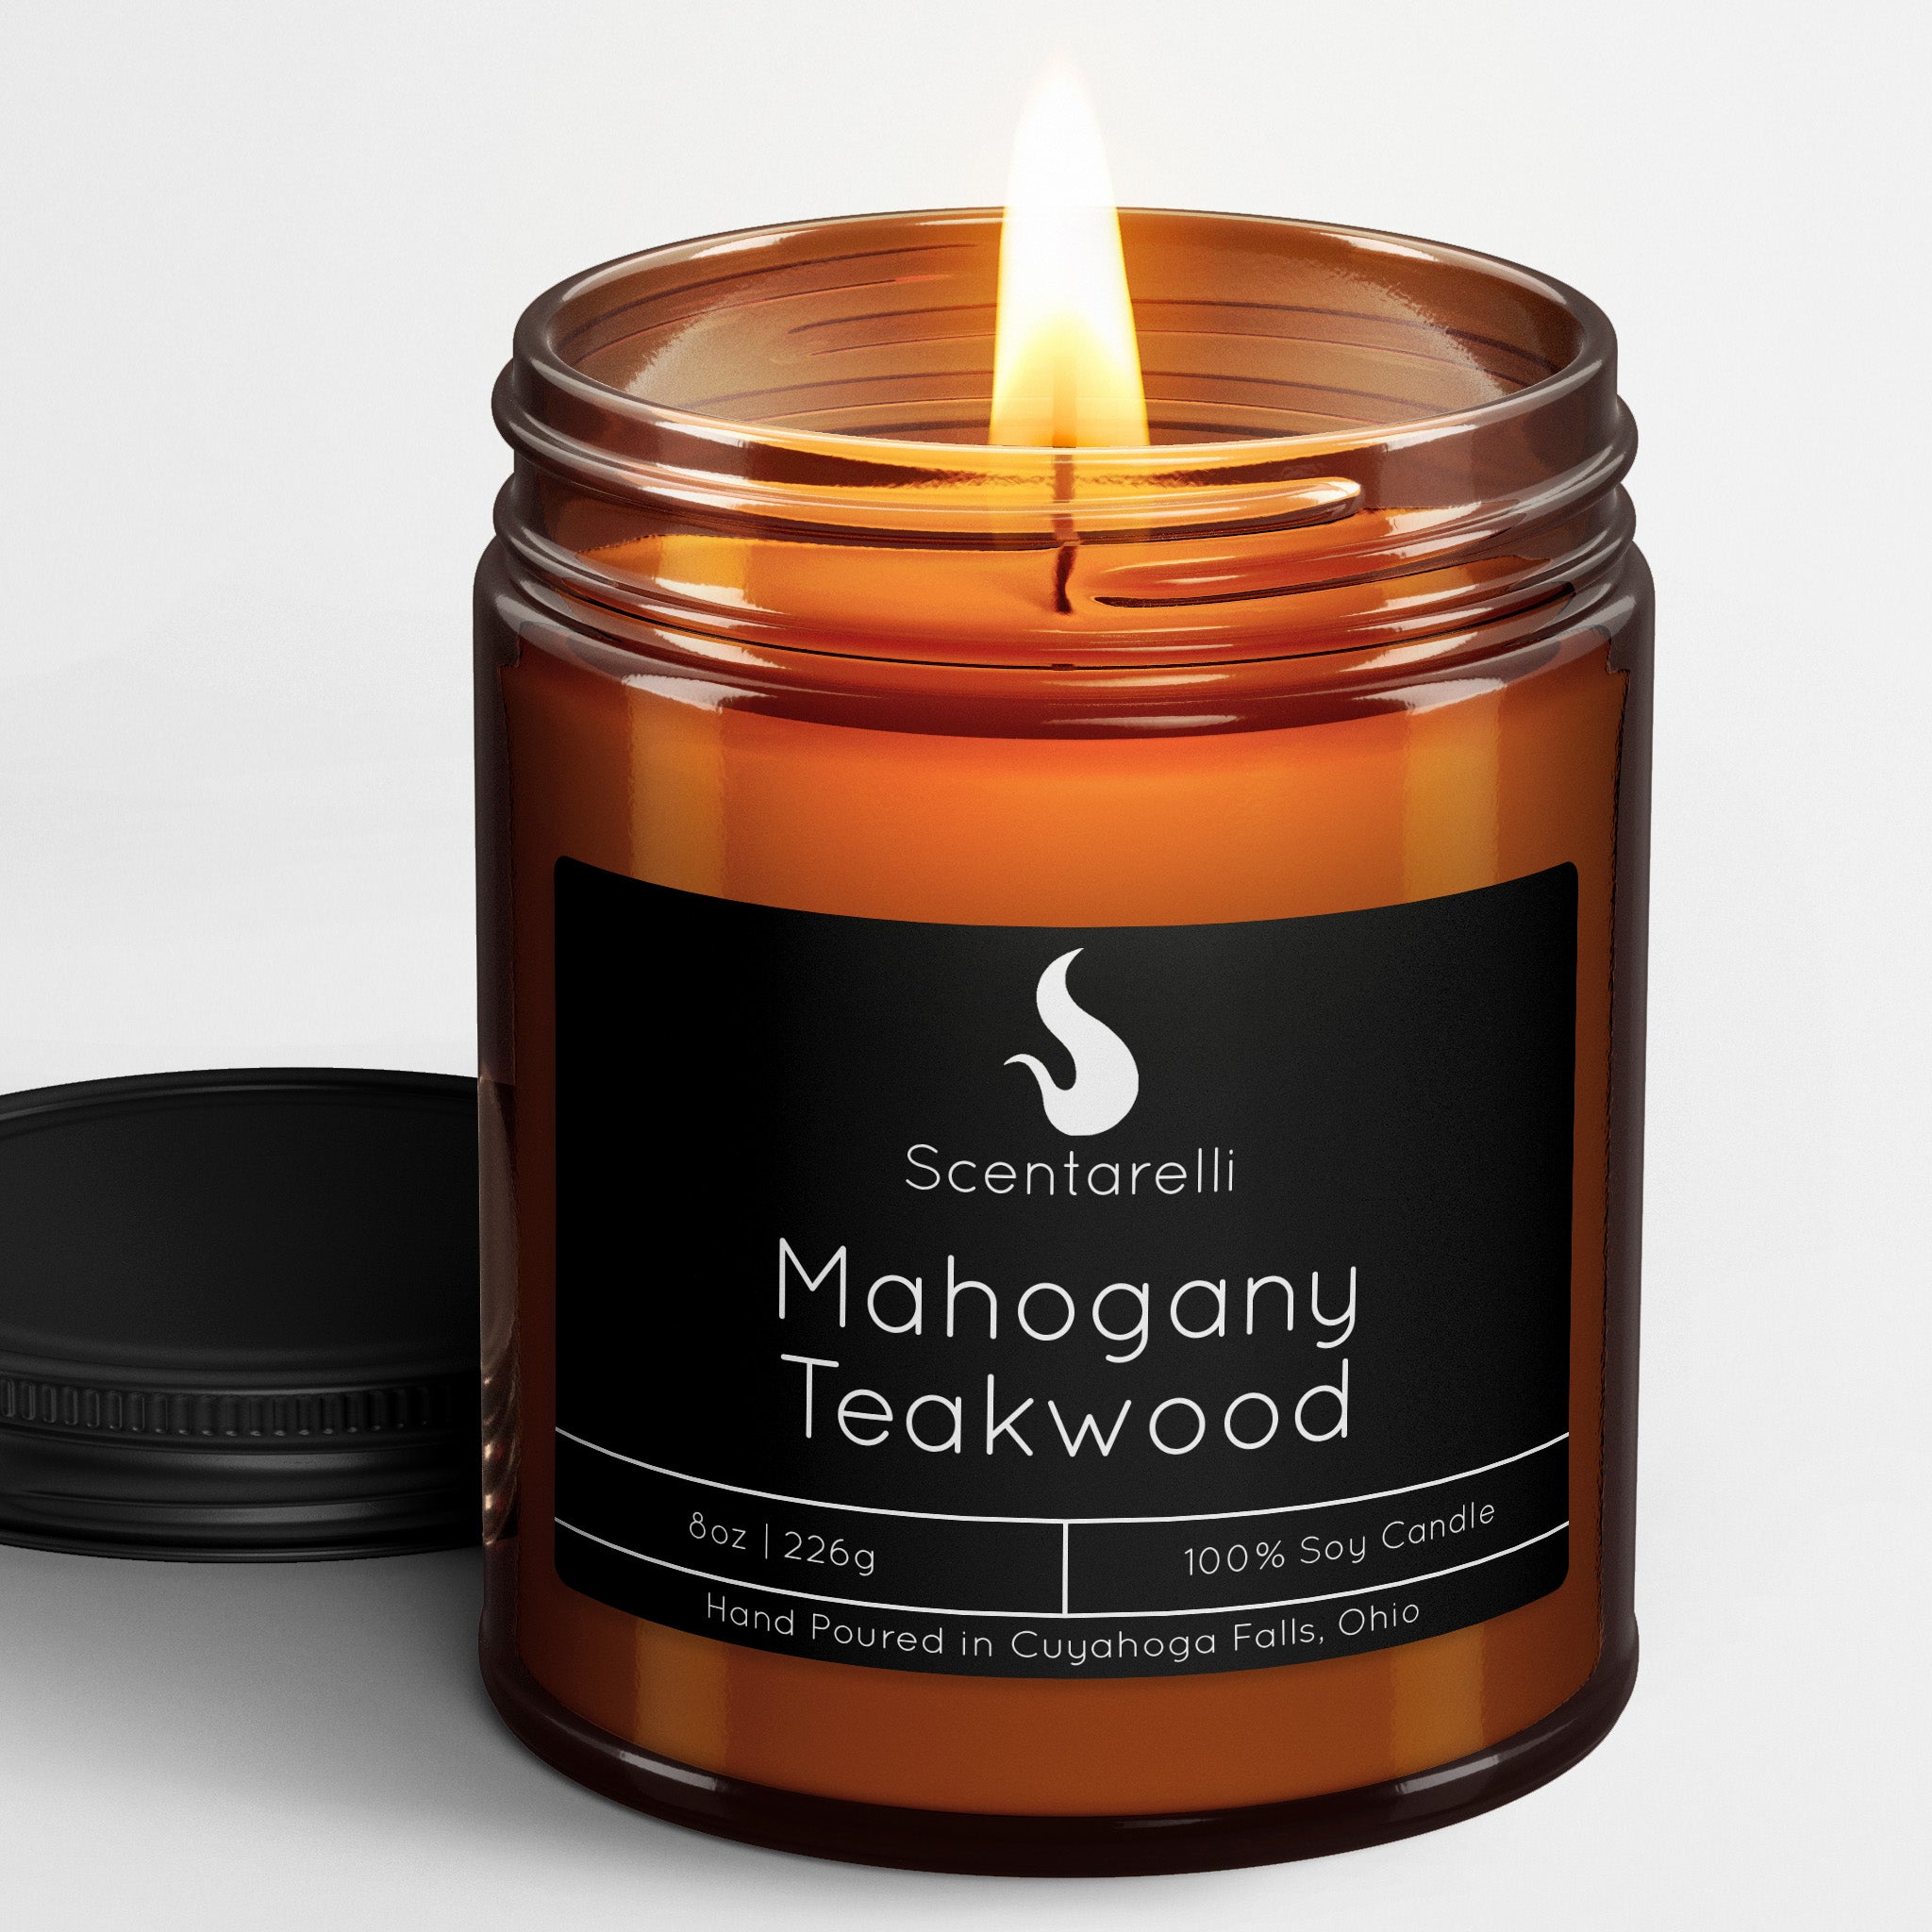 Crazy Candles Mahogany Teakwood (Made in USA) 3 Bottles 1/2 Fl Oz Each  (15ml) Premium Grade Scented Fragrance Oil (Blend of Mahogany, Cedarwood  and